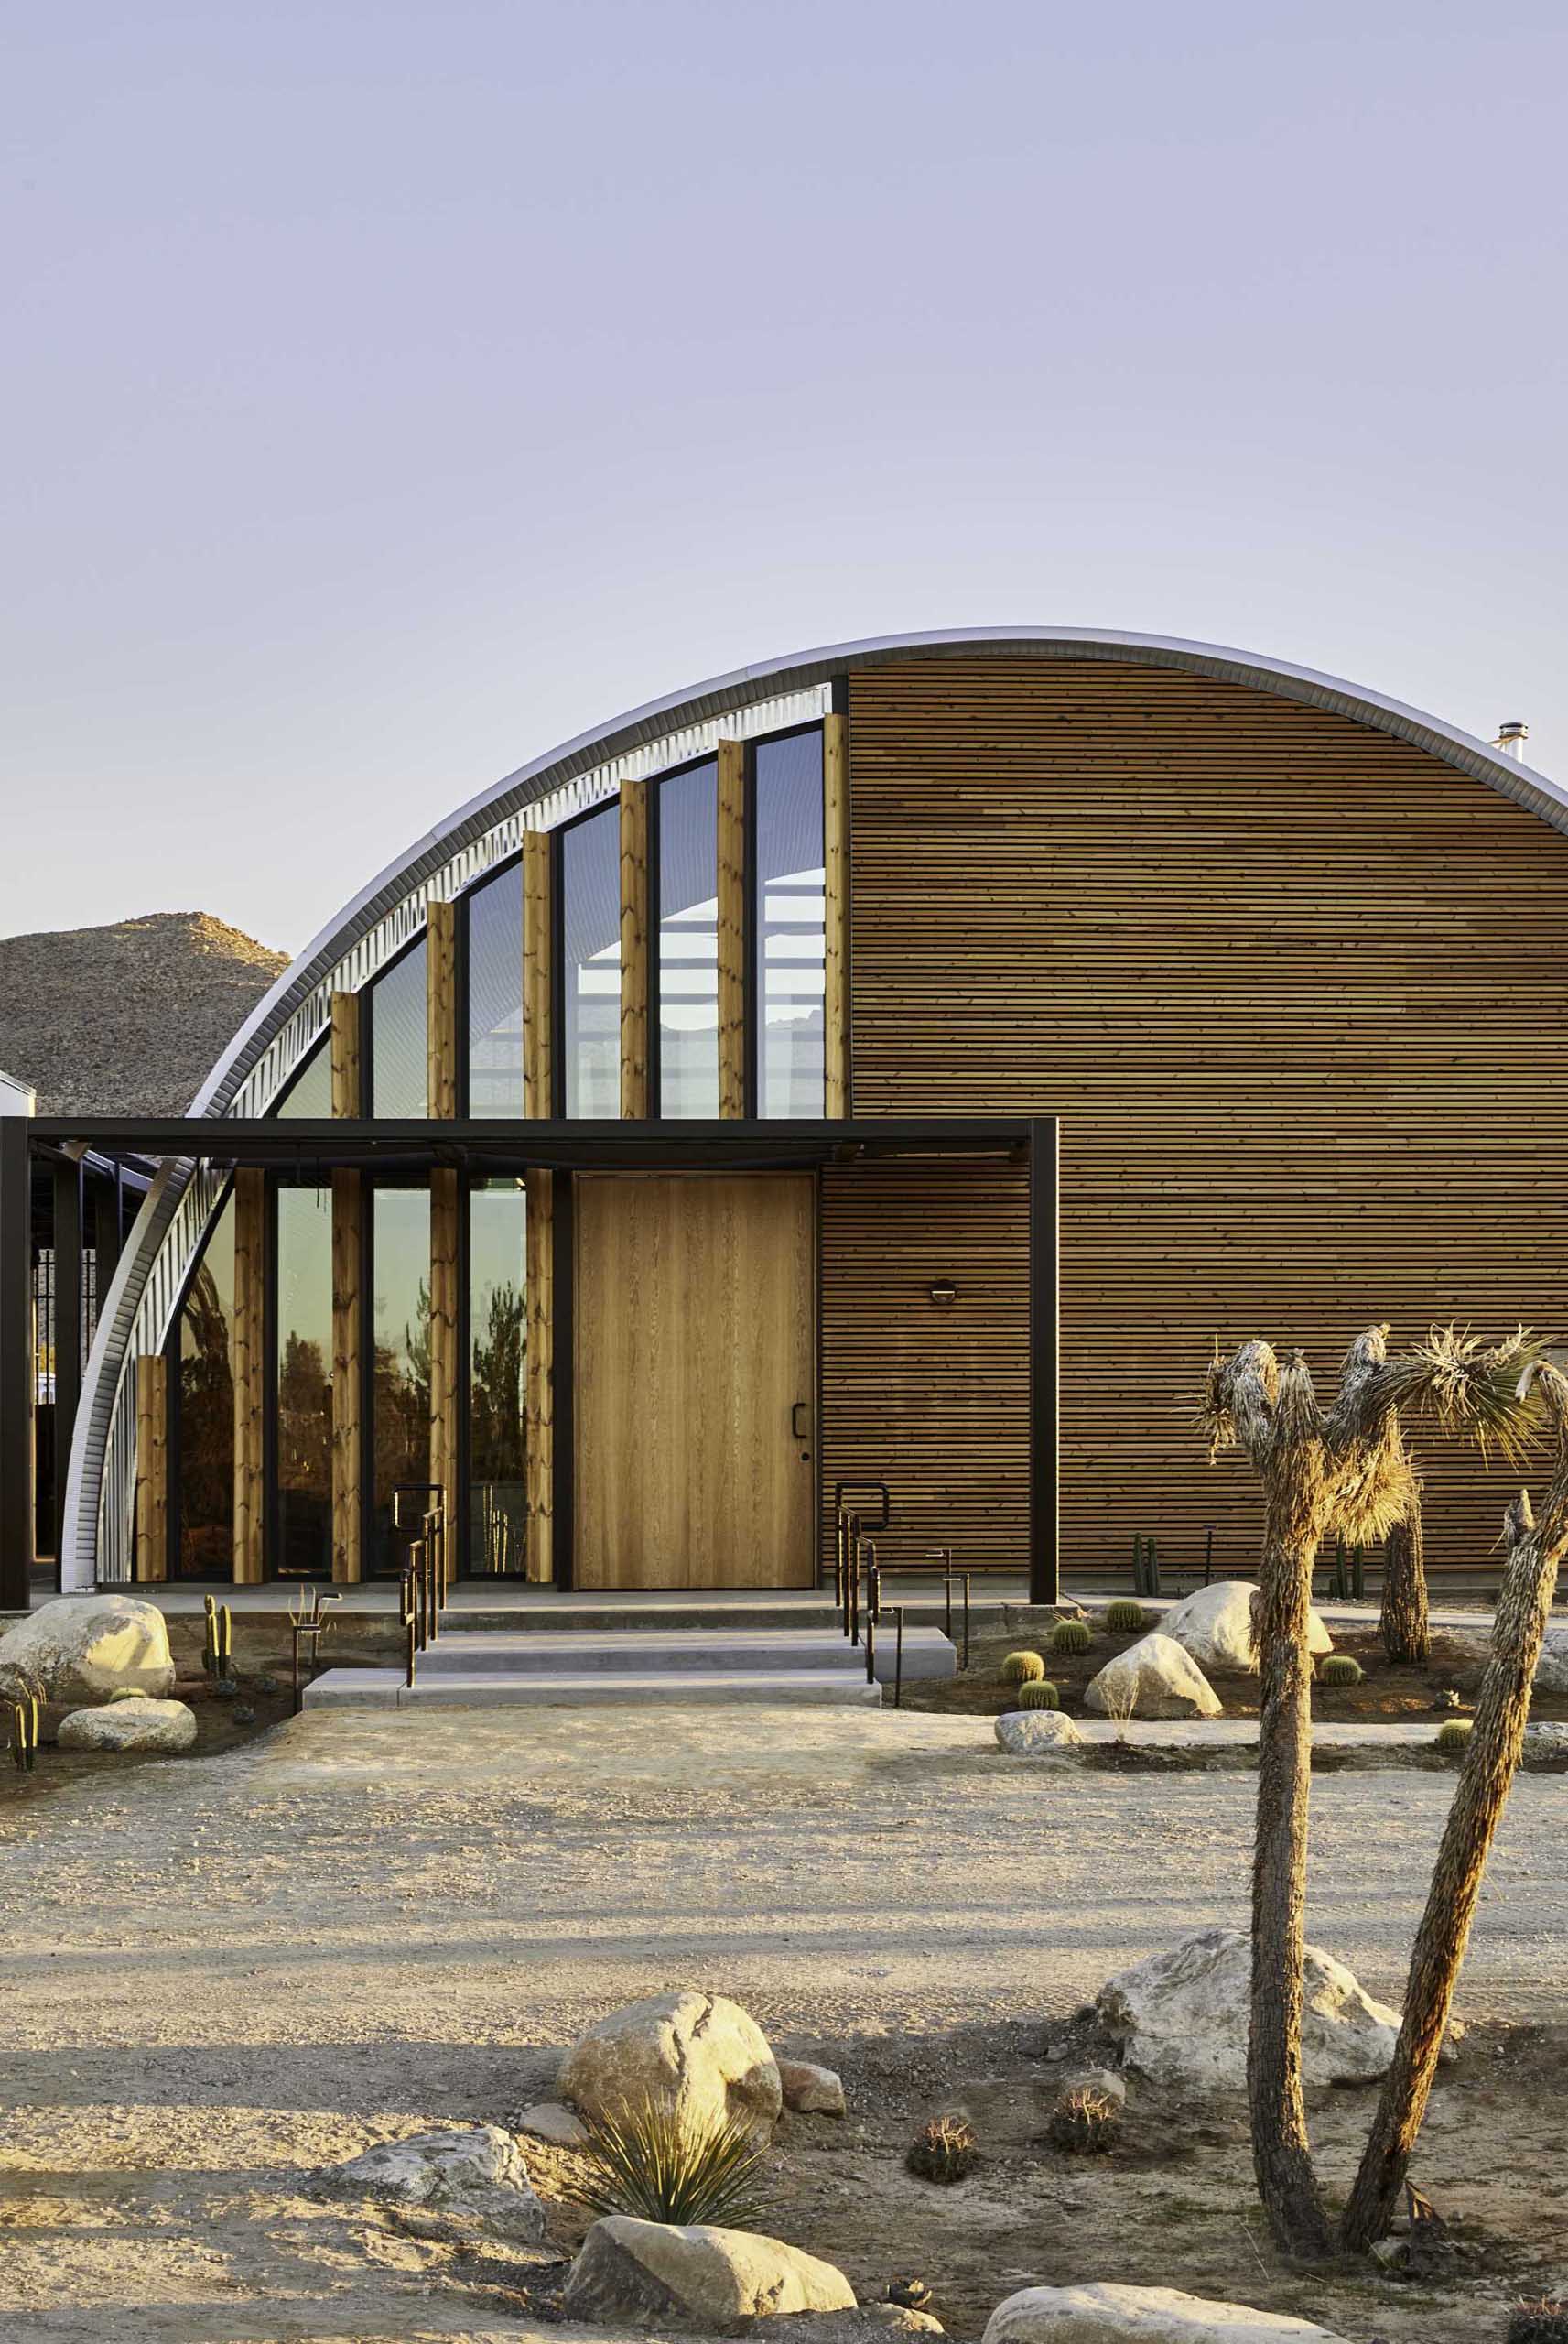 The architects chose to use raw and natural materials on this Quonset Hut inspired Clubhouse, which will weather in place and improve with age as they blend into the natural landscape. 